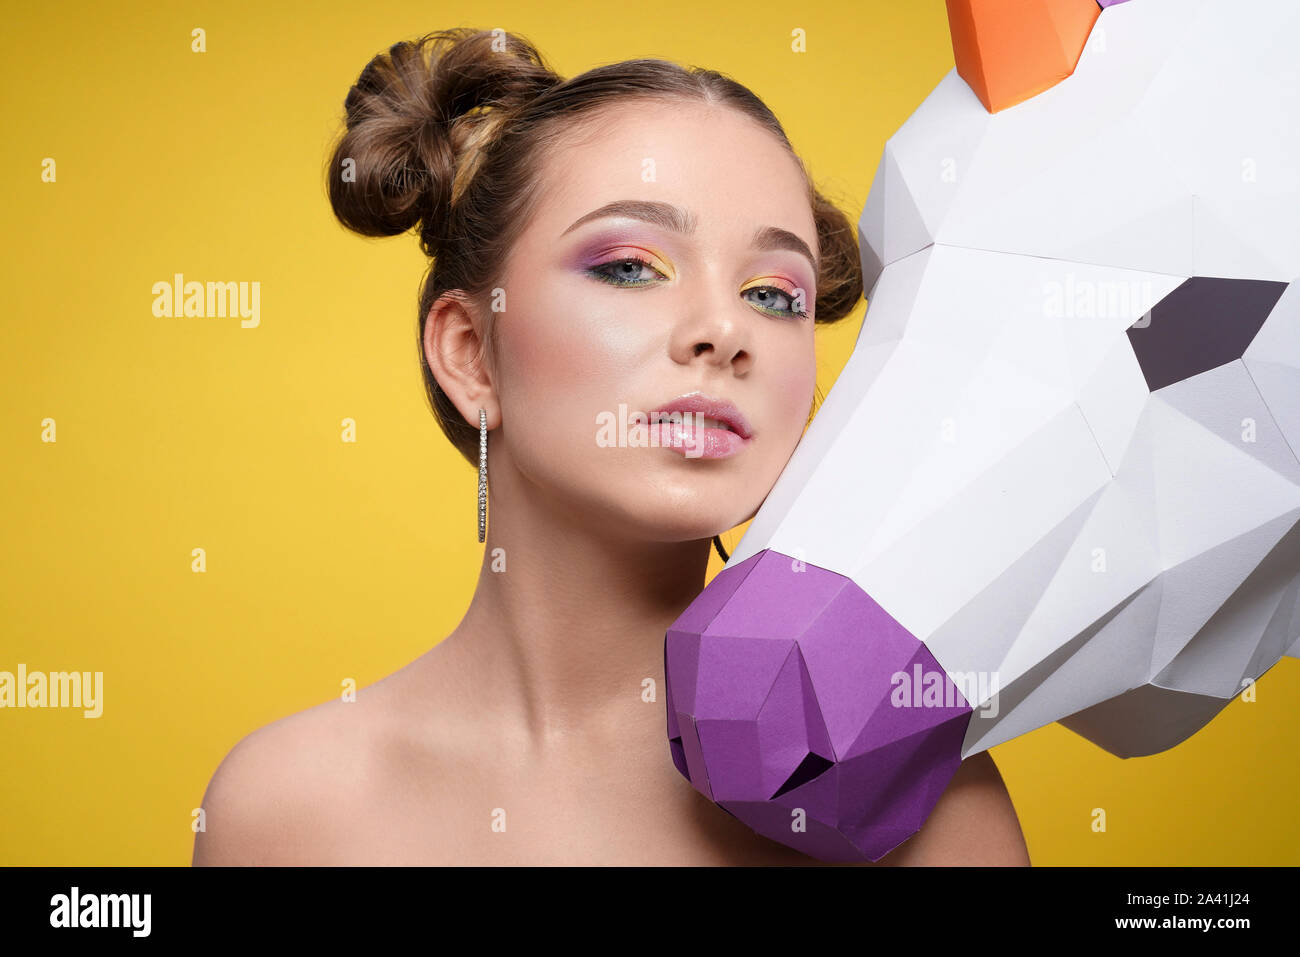 Front view of pretty young model with professional colorful makeup posing with 3d unicorn on yellow isolated background. Stylish girl with bright shadows looking at camera in studio. Stock Photo